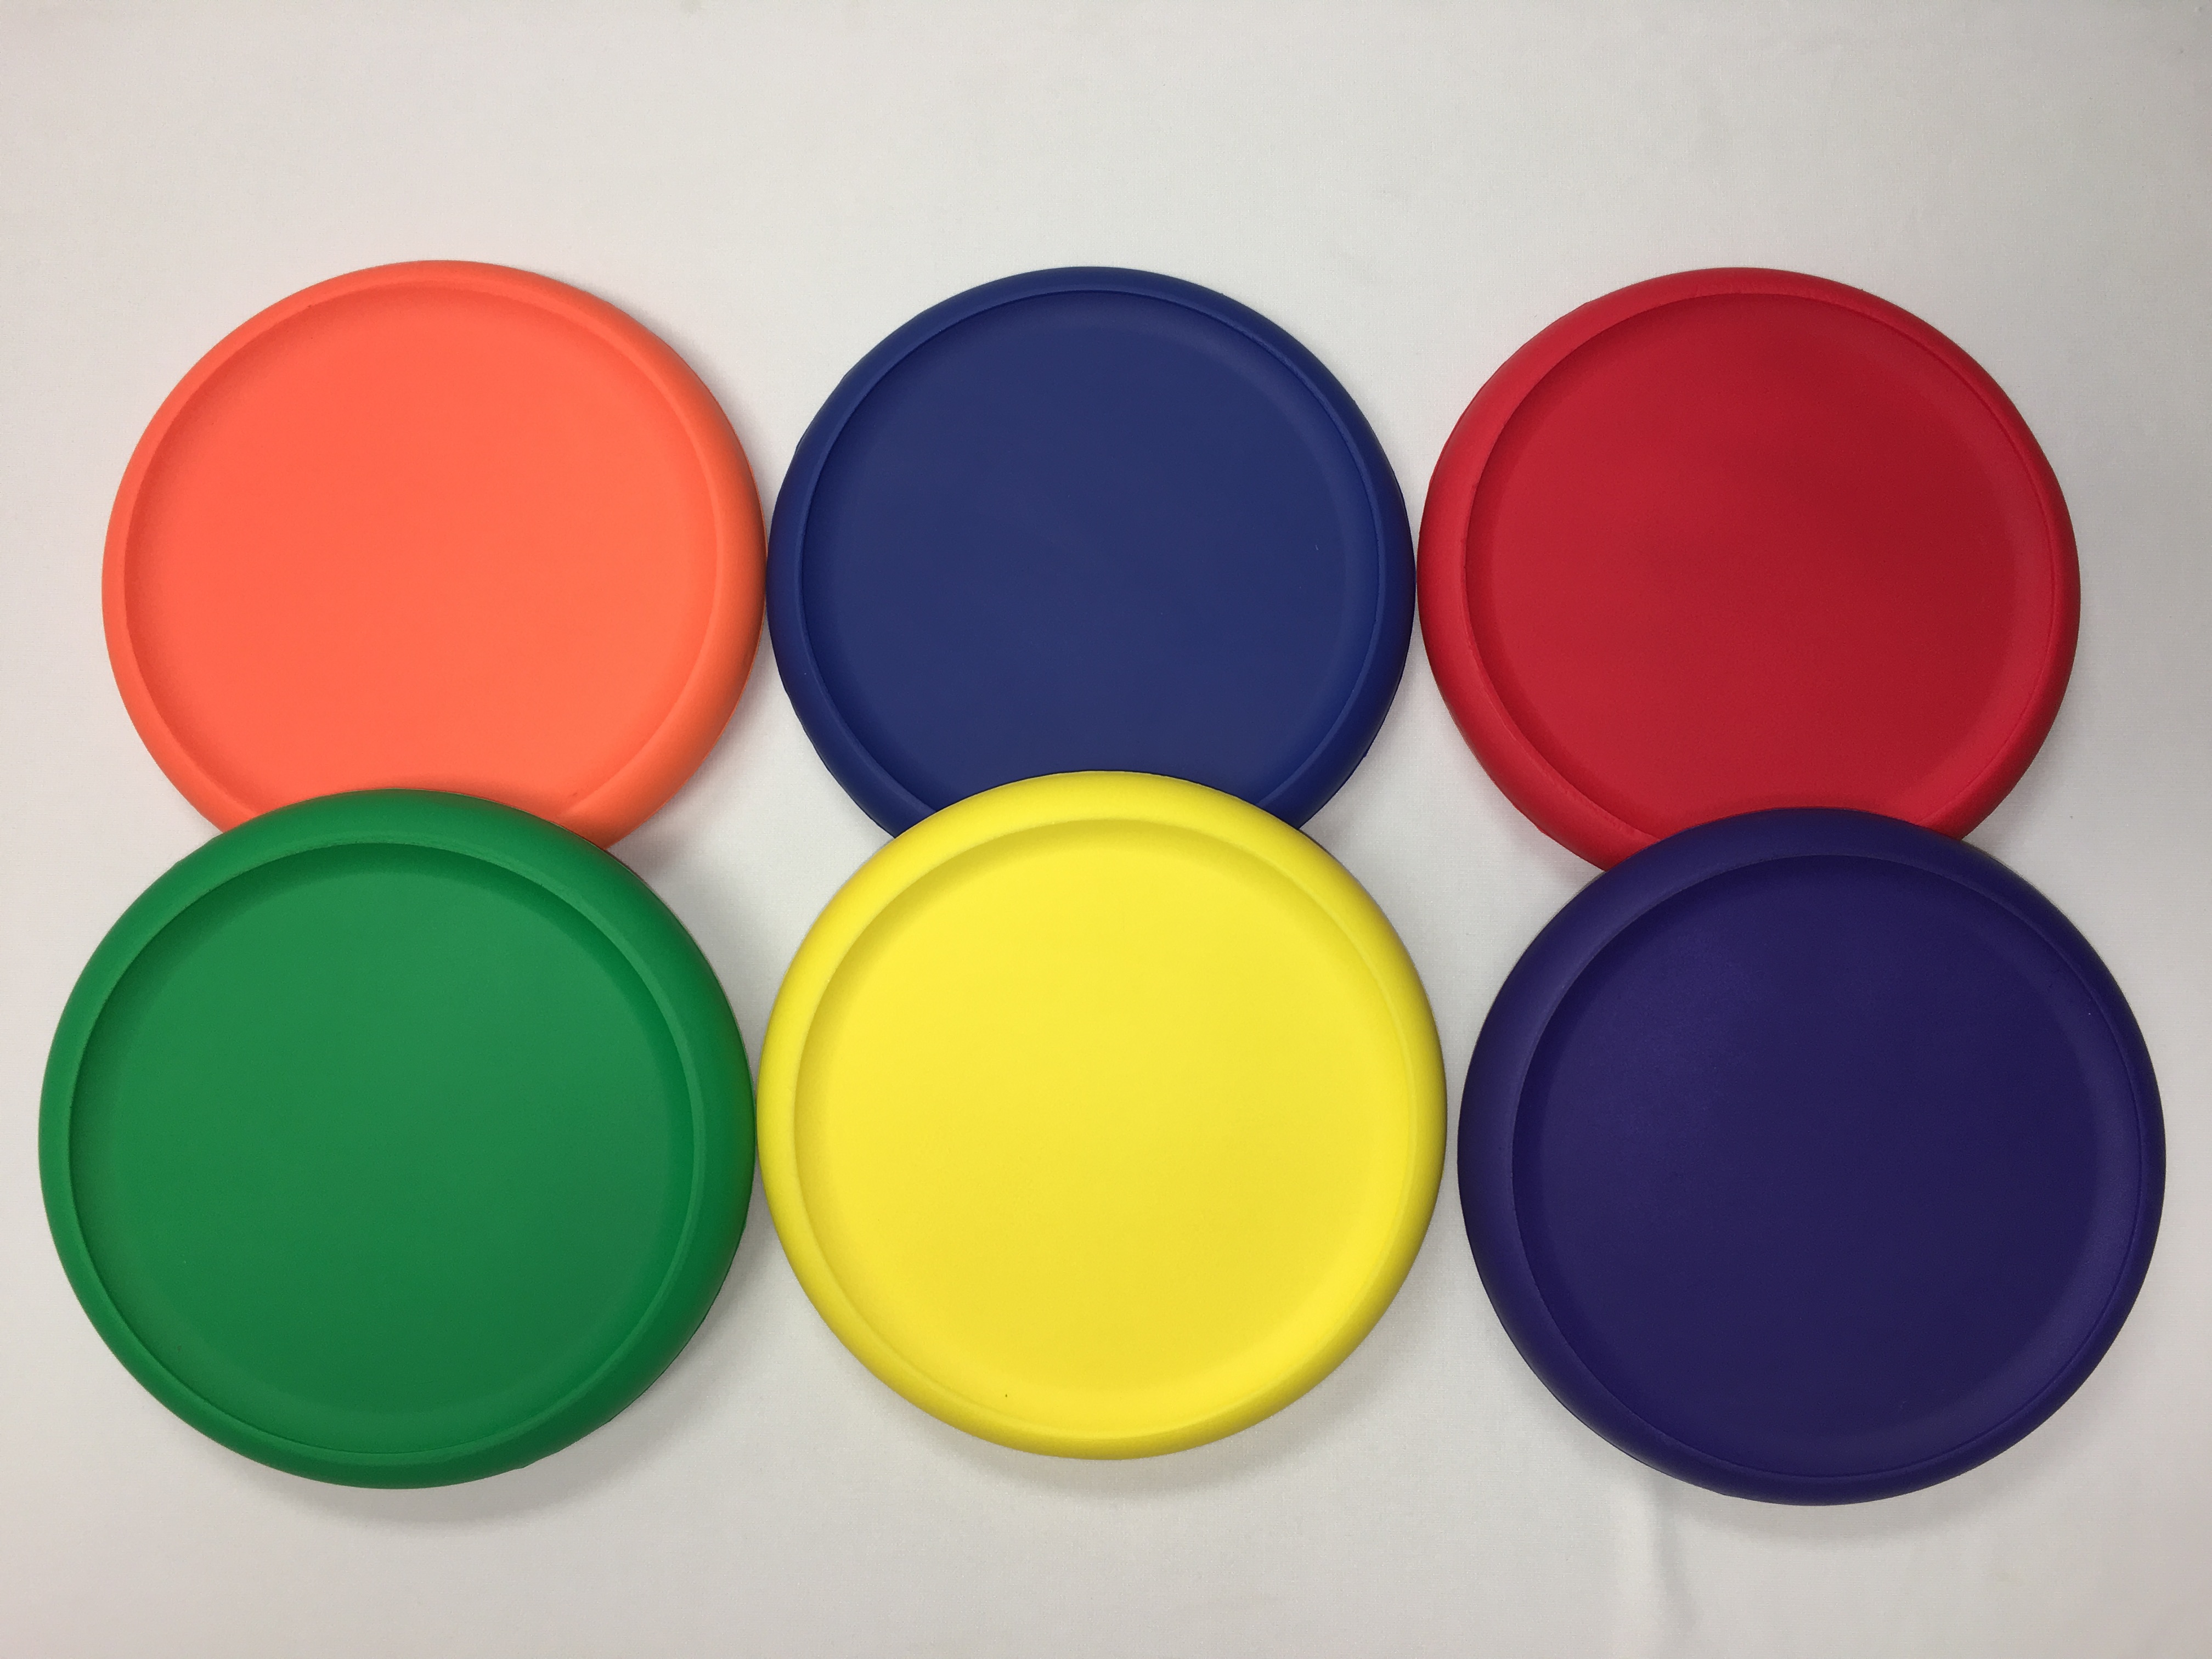 Picture of Everrich EVM-0006 8.75 Inch Soft and Friendly Flying Disc - Set of 6 Colors